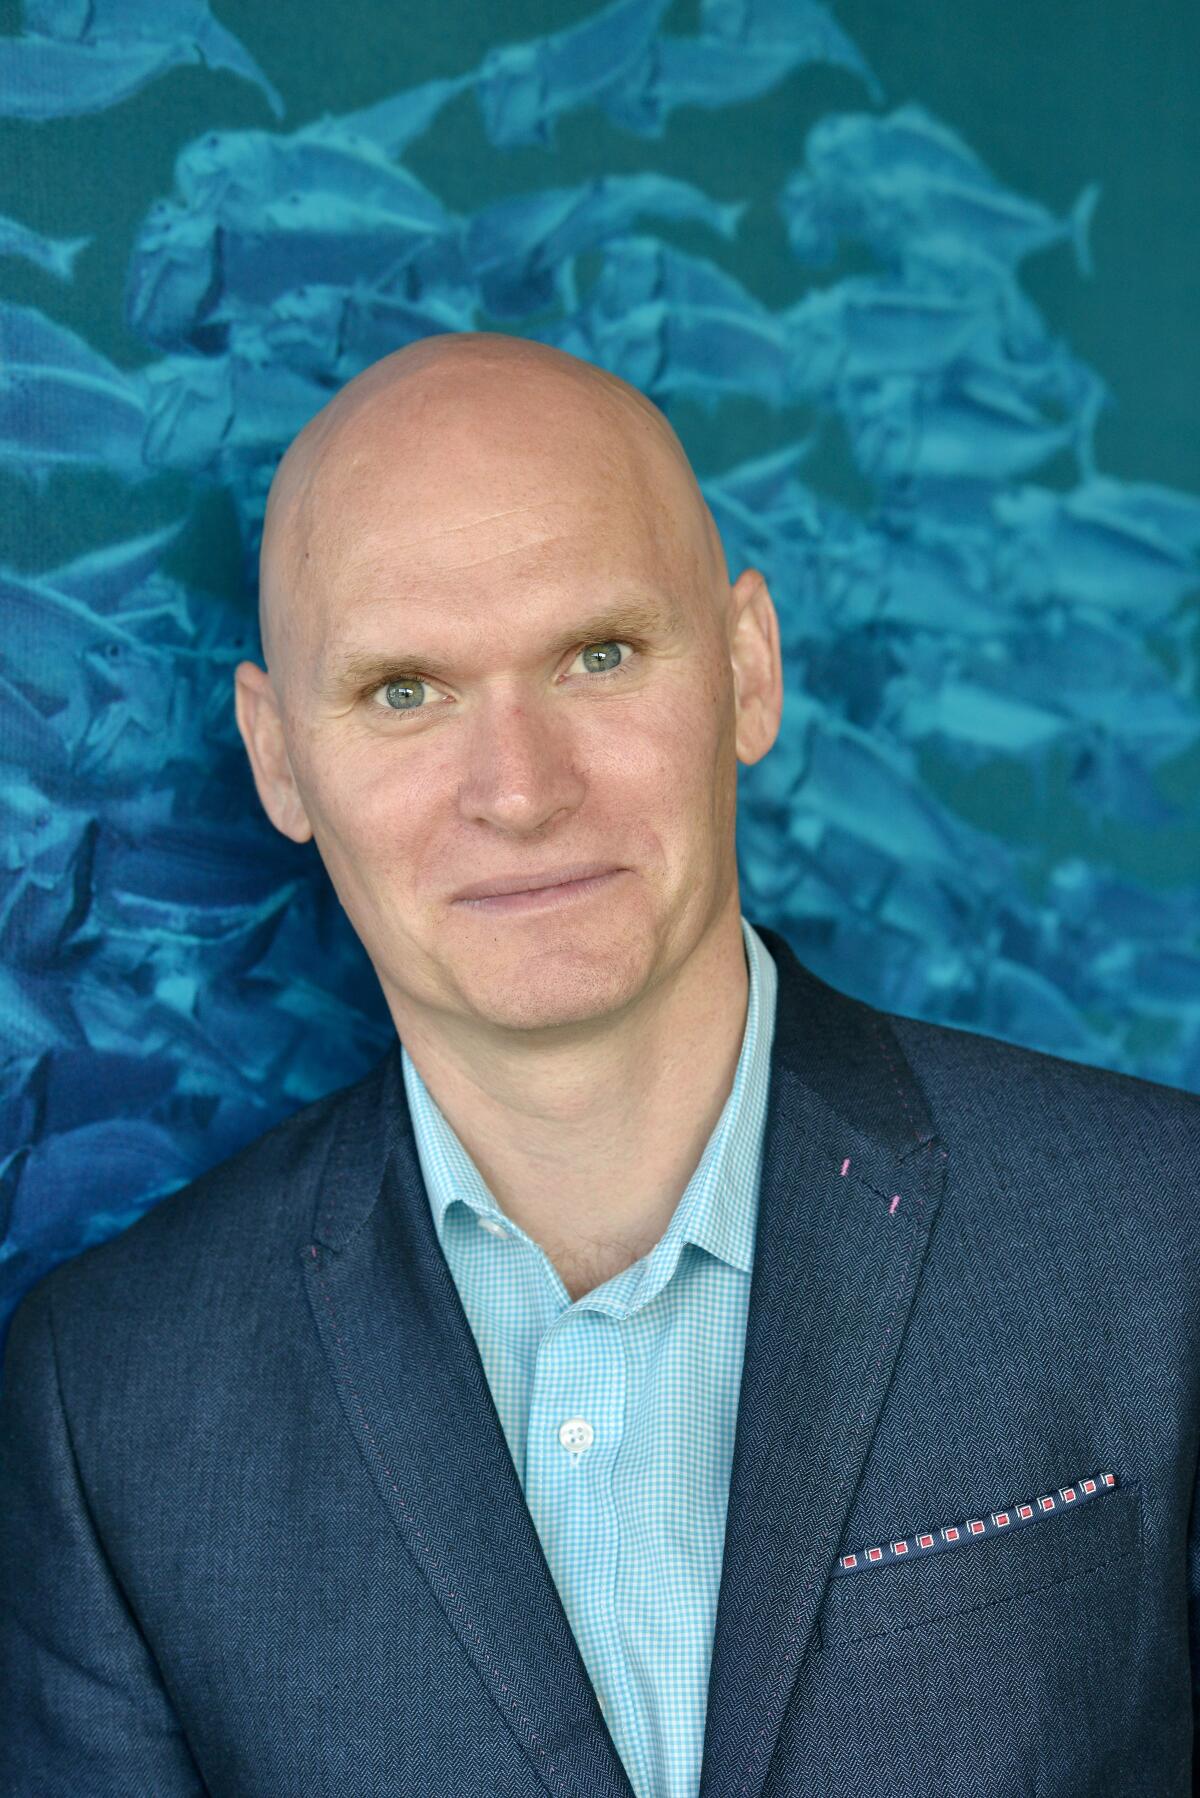 A portrait of "Cloud Cuckoo Land" author Anthony Doerr